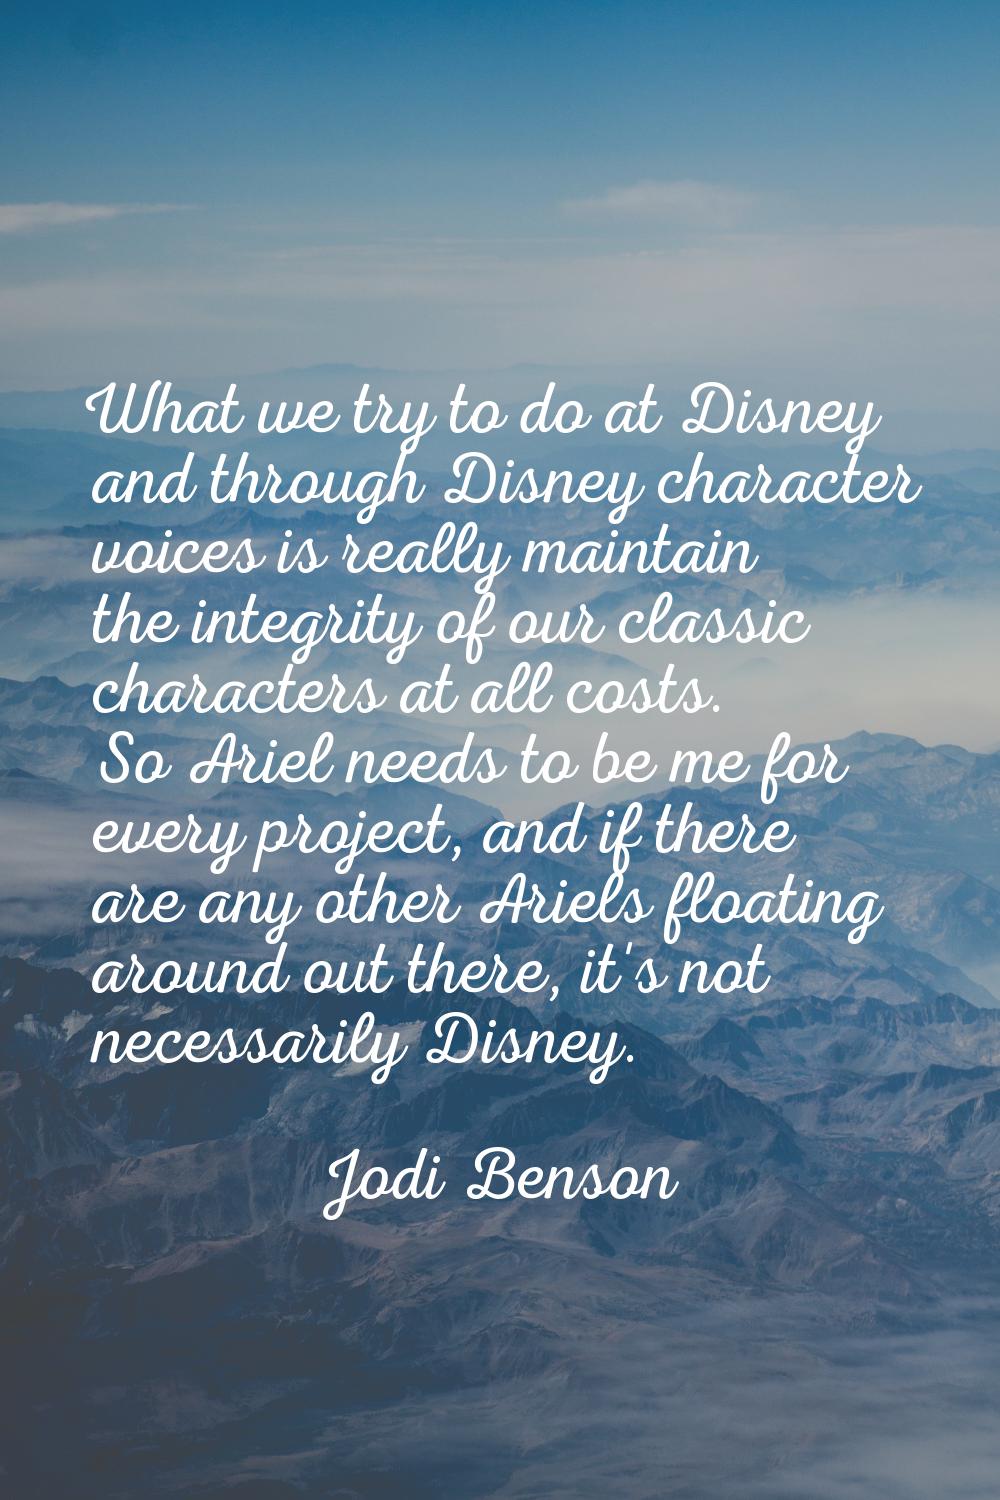 What we try to do at Disney and through Disney character voices is really maintain the integrity of